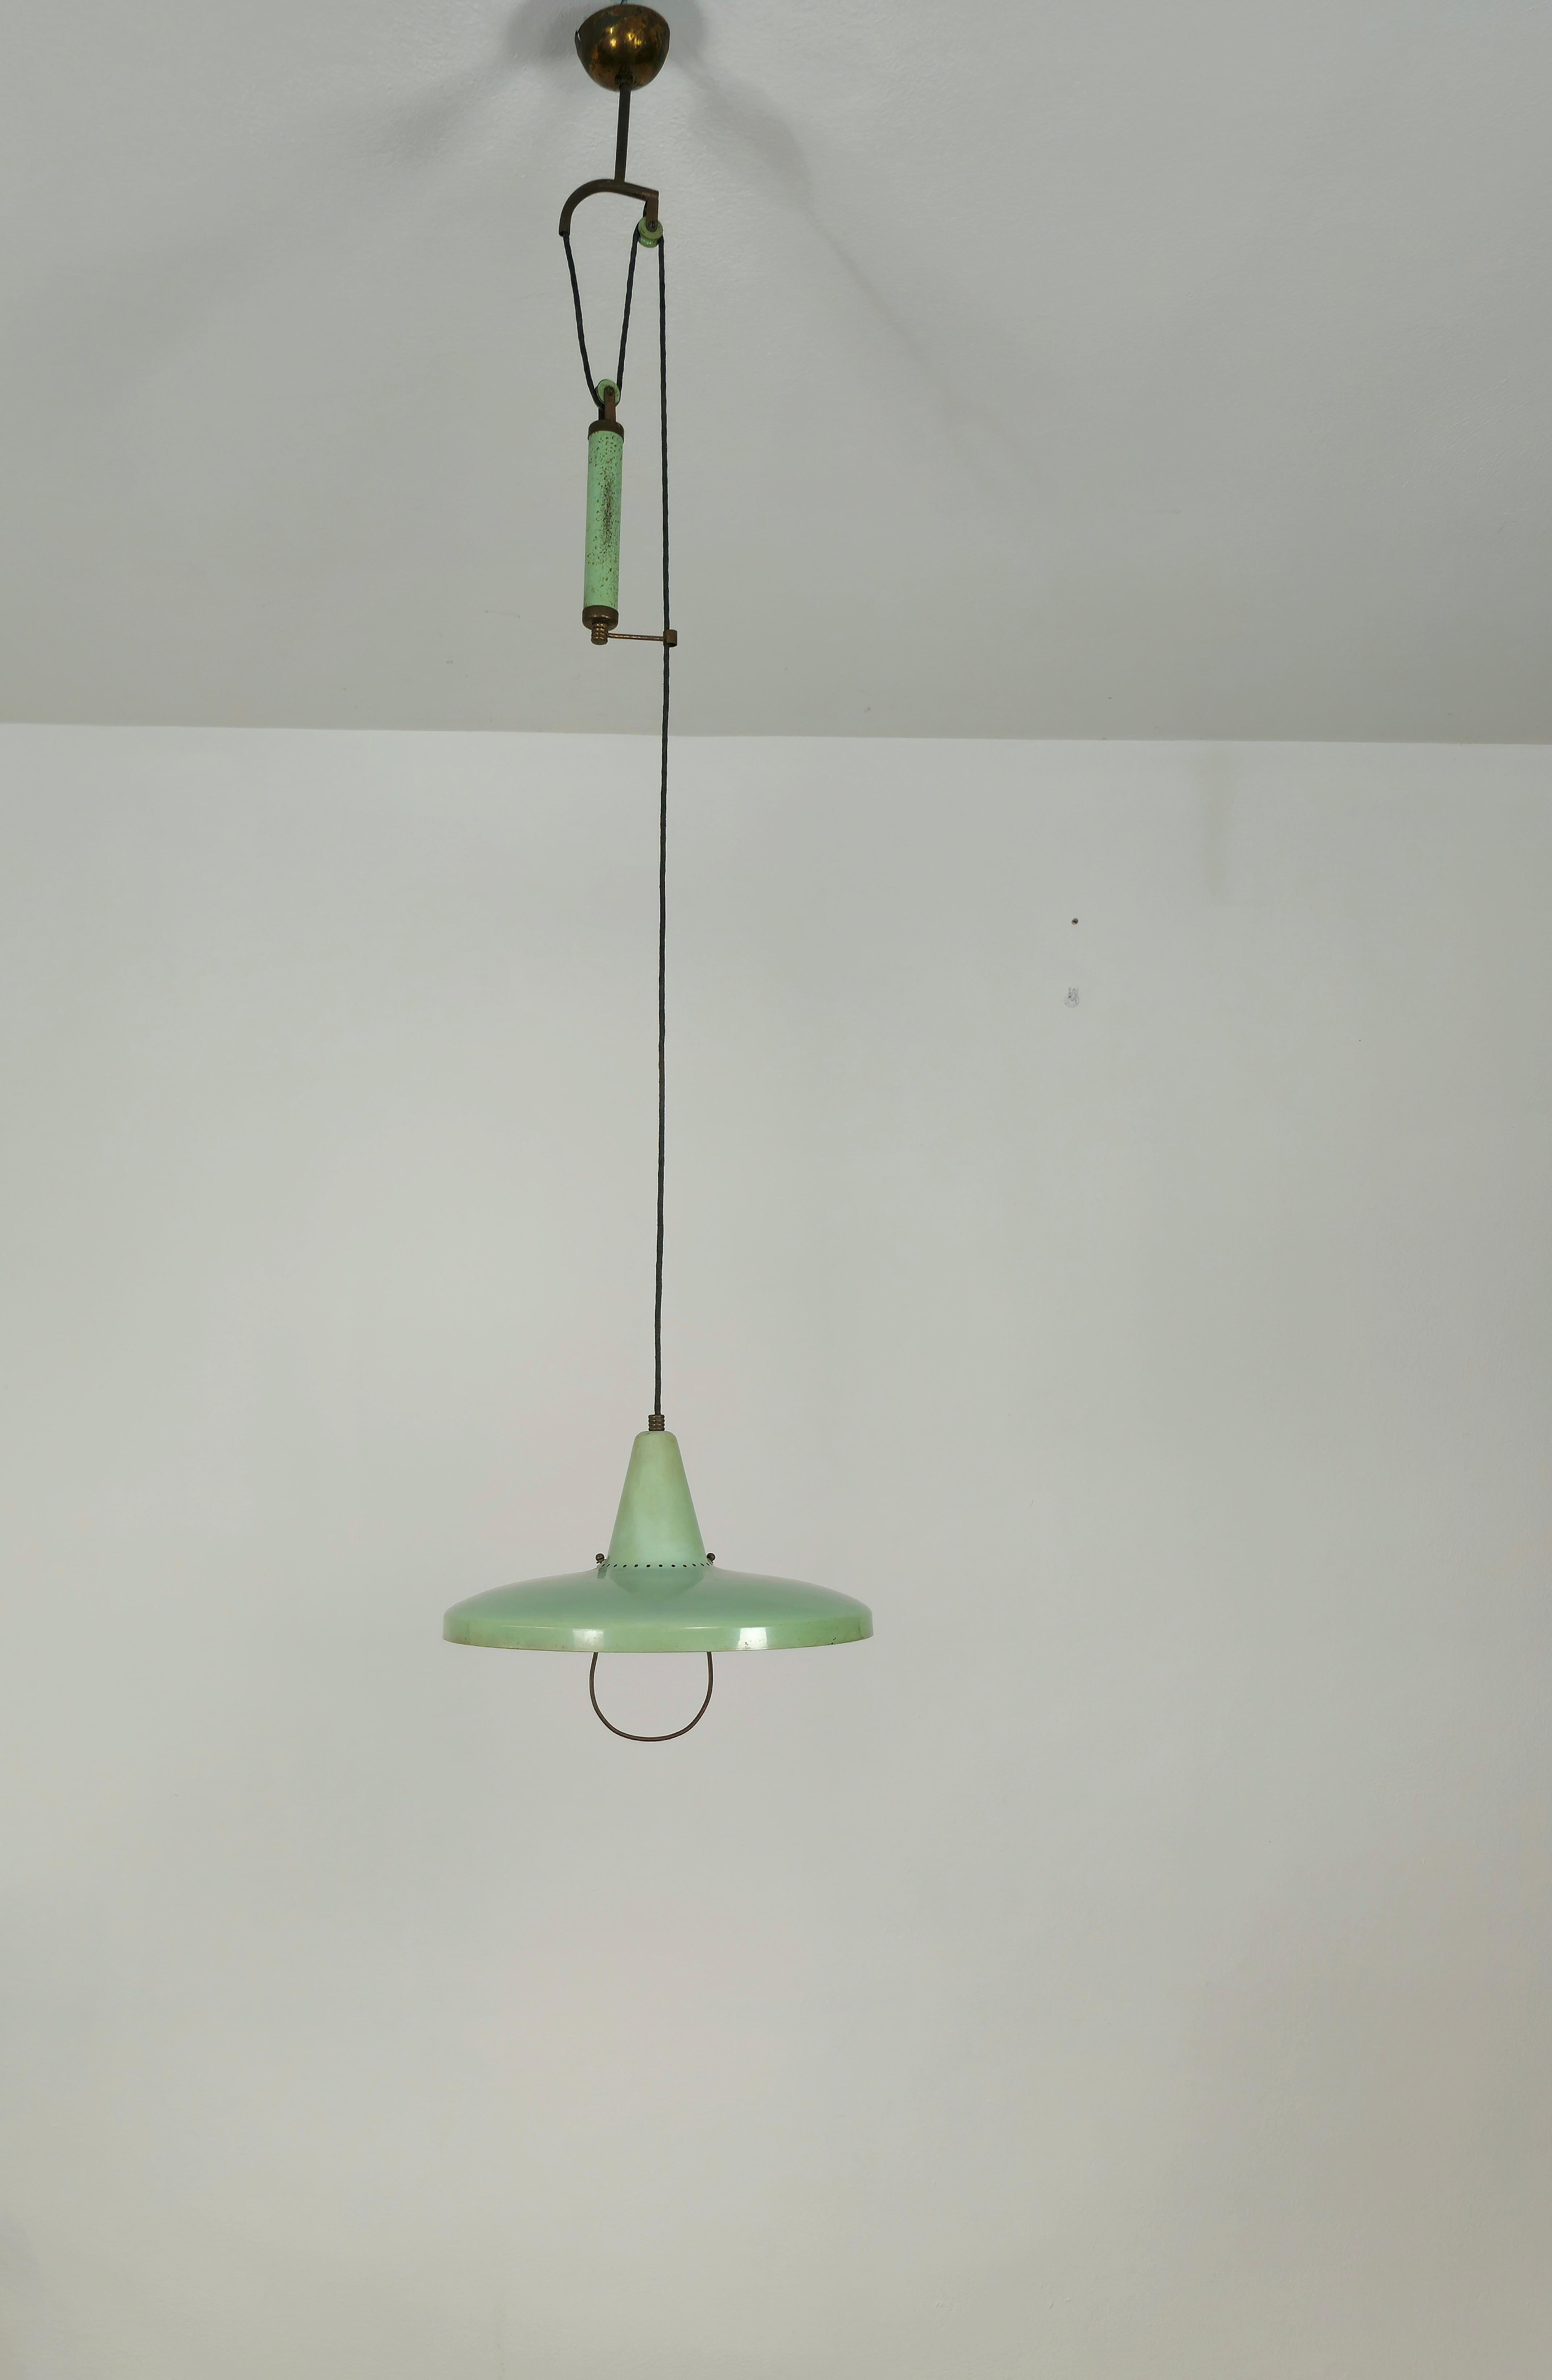 Suspension lamp attributed to Stilnovo with up and down mechanism with brass accessories and aqua green enamelled aluminum diffuser. Made in Italy in the 1950s.



Note: We try to offer our customers an excellent service even in shipments all over